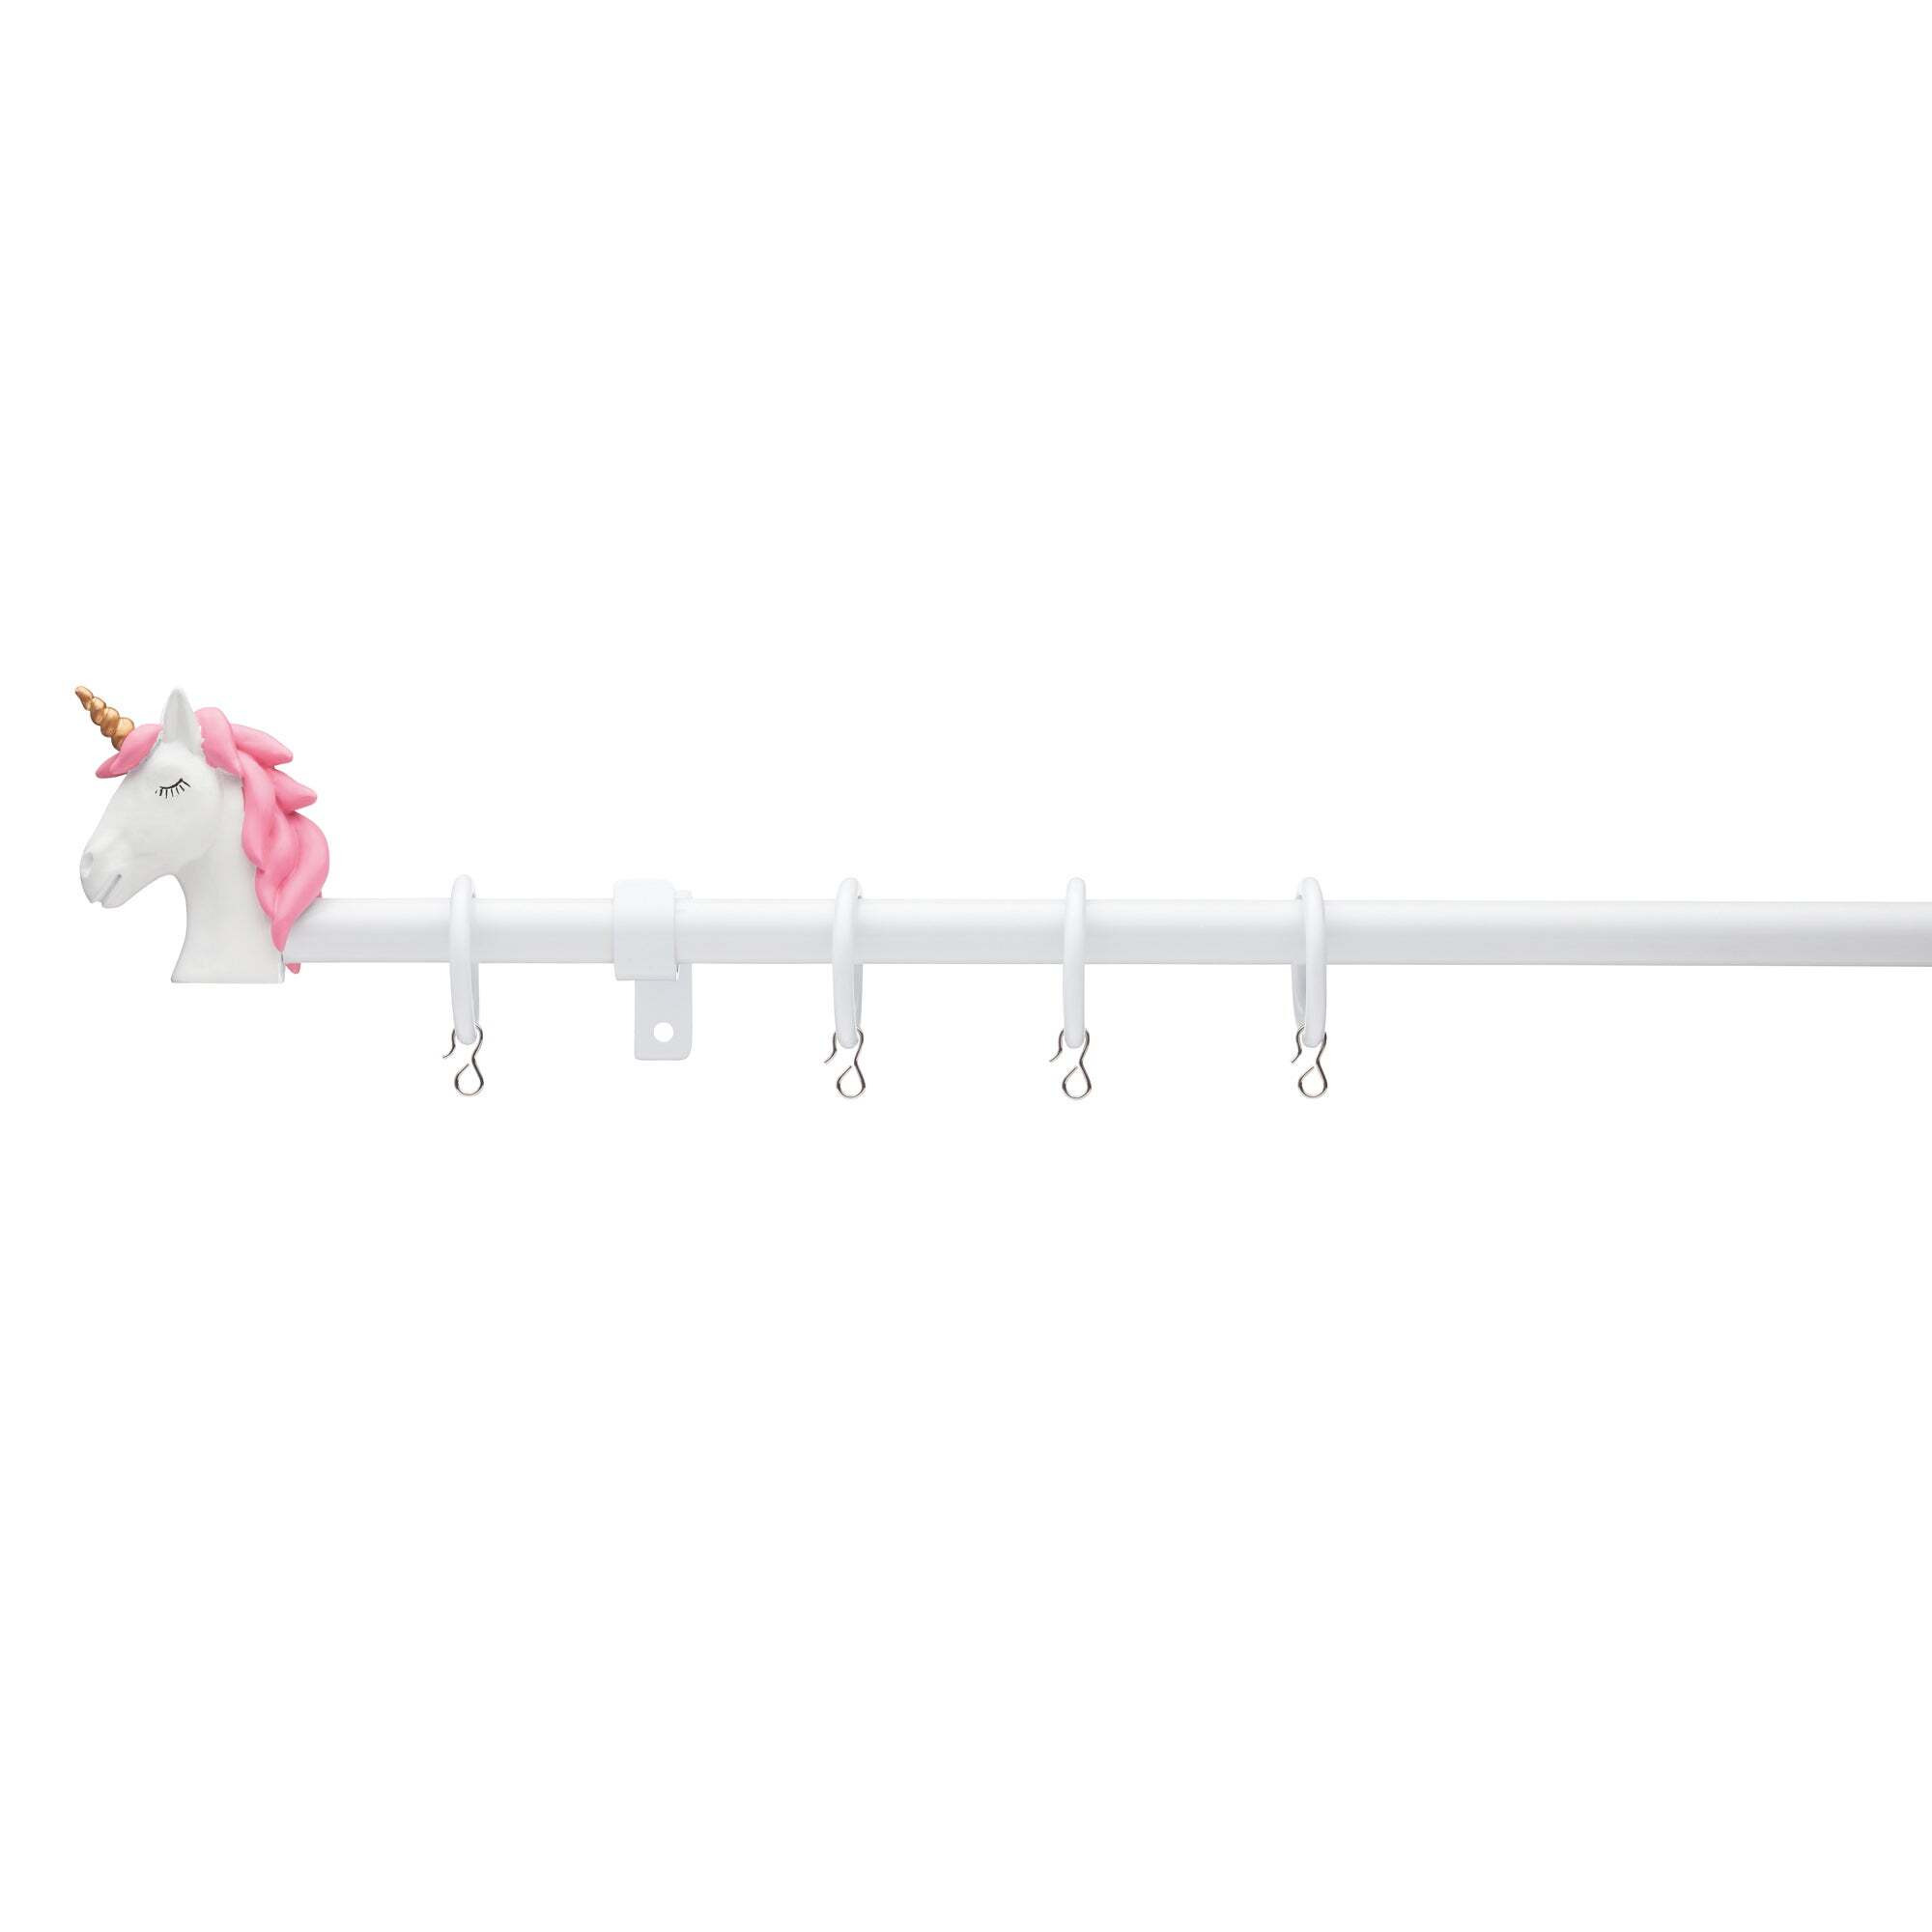 Unicorn Extendable Eyelet Curtain Pole Dia. 19mm Pink and White